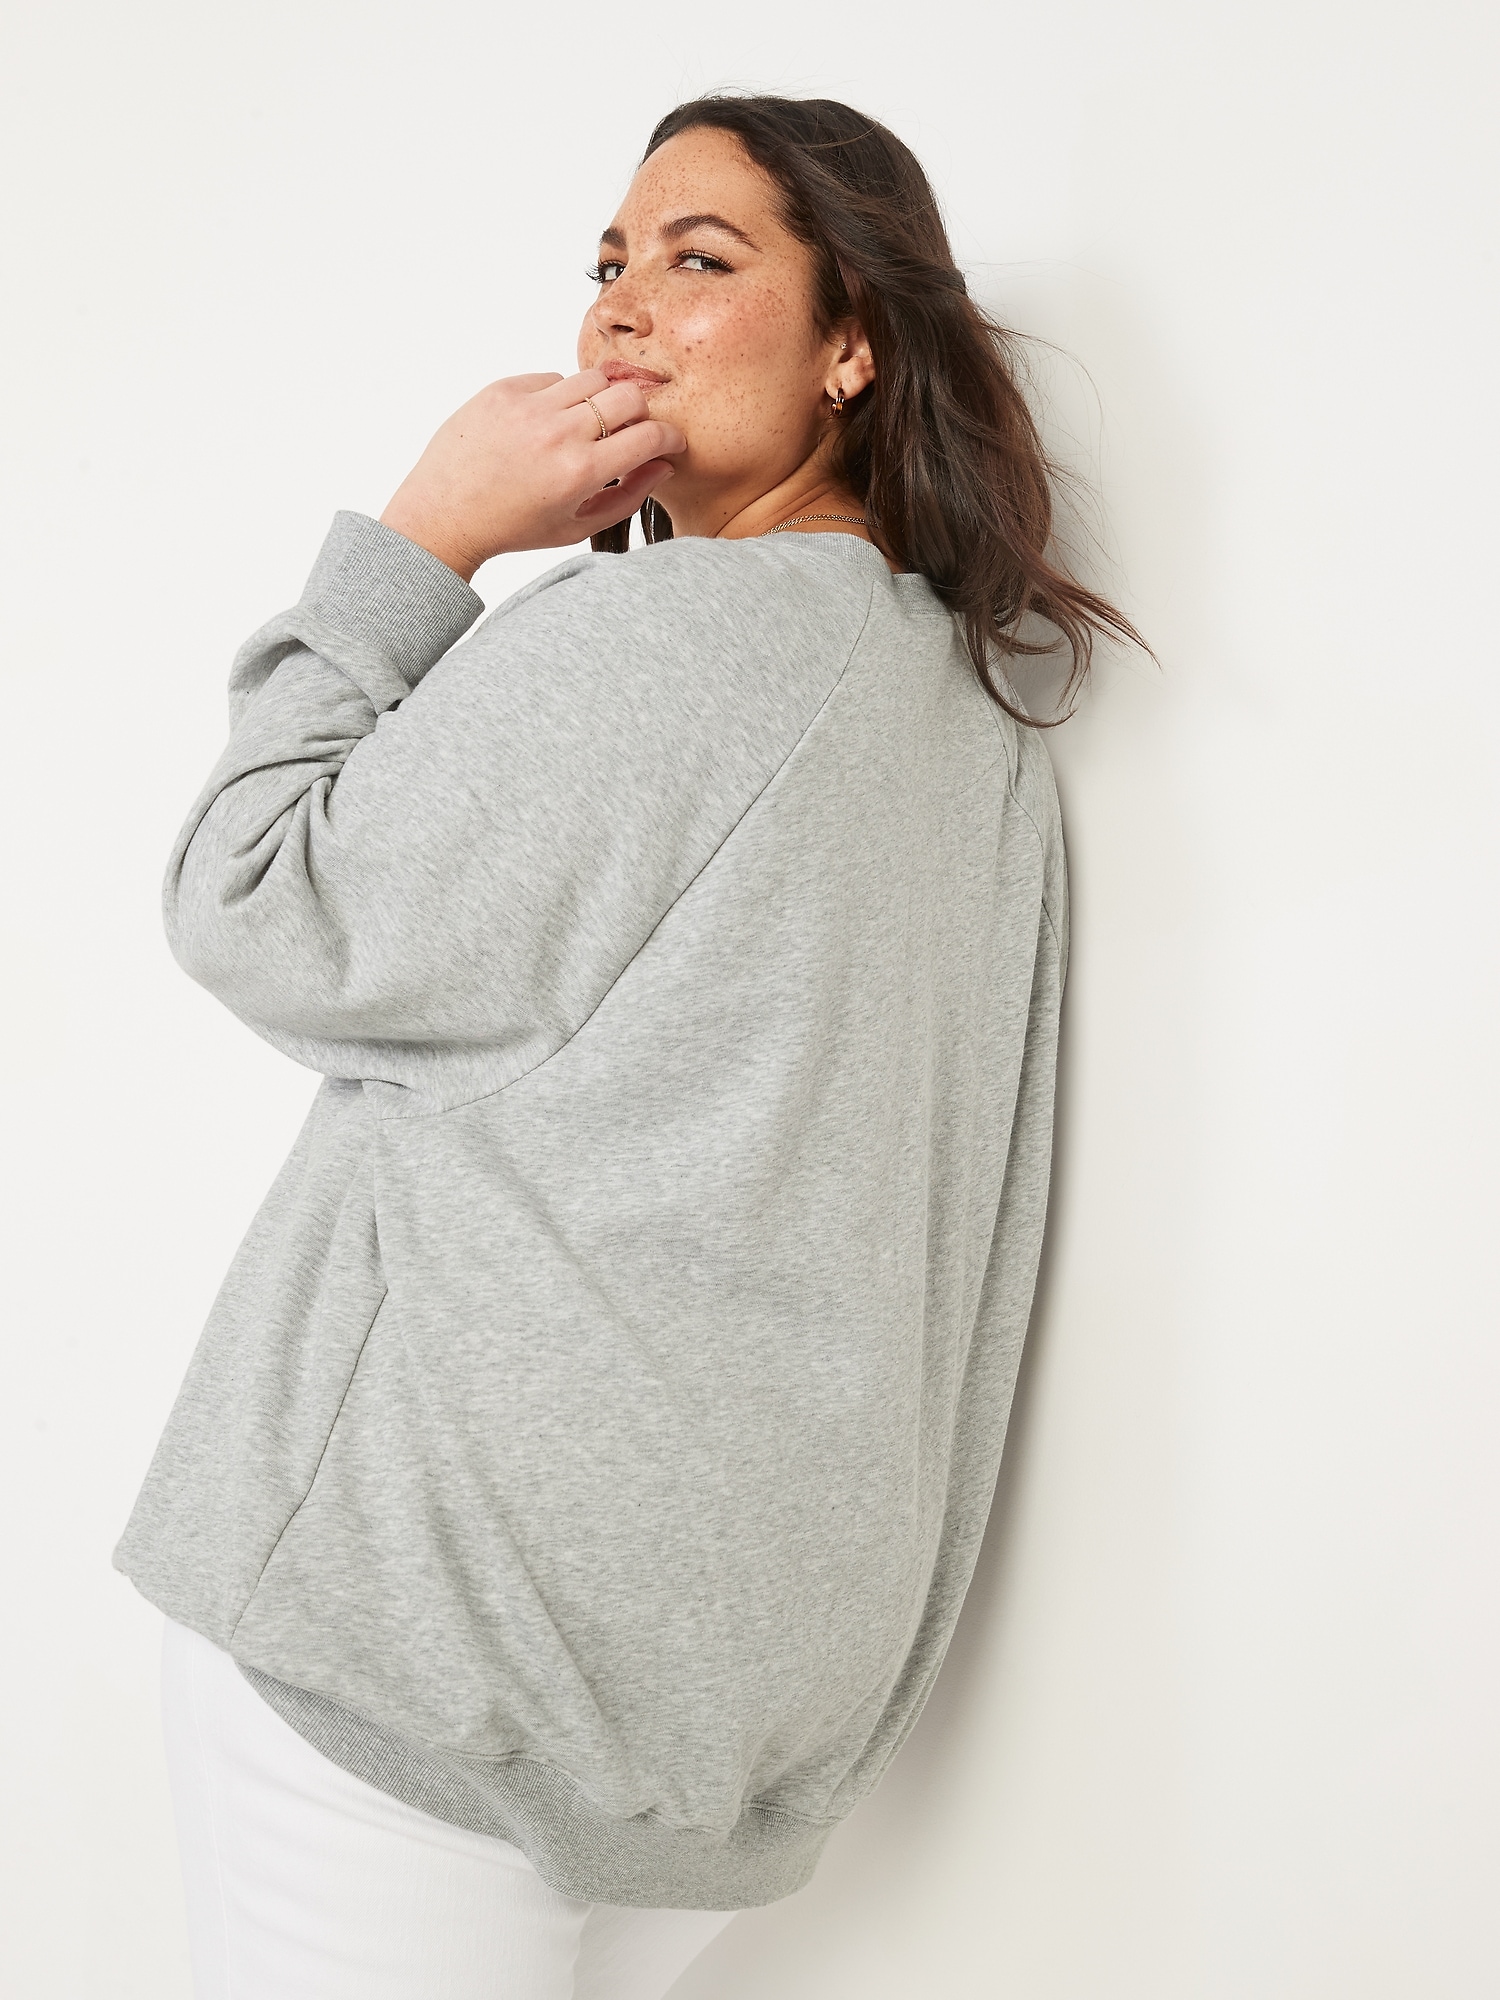 for French Sweatshirt Women Terry | Oversized Navy Old Tunic